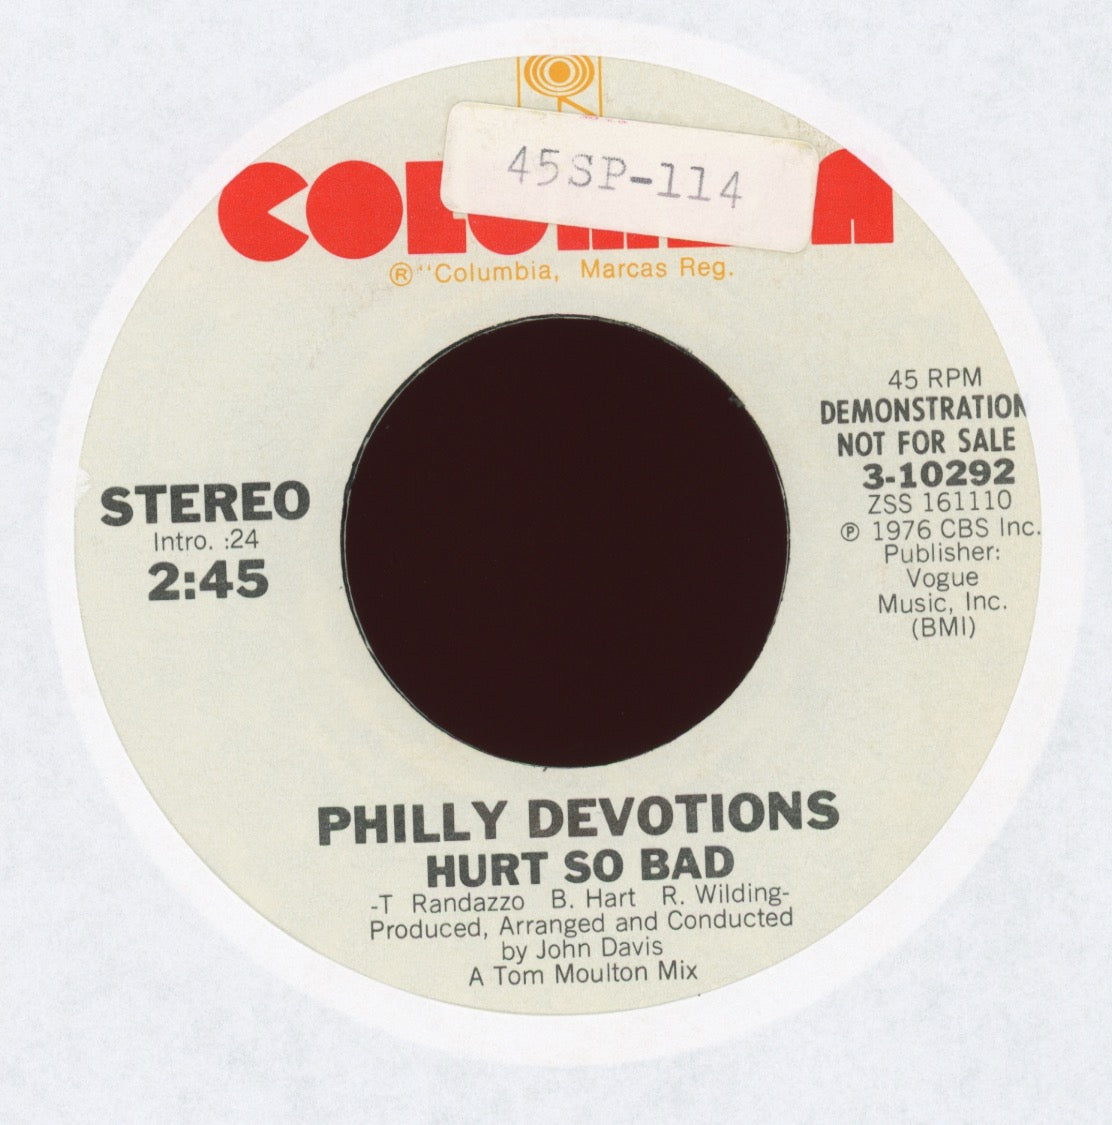 Philly Devotions - Hurt So Bad on Columbia Promo